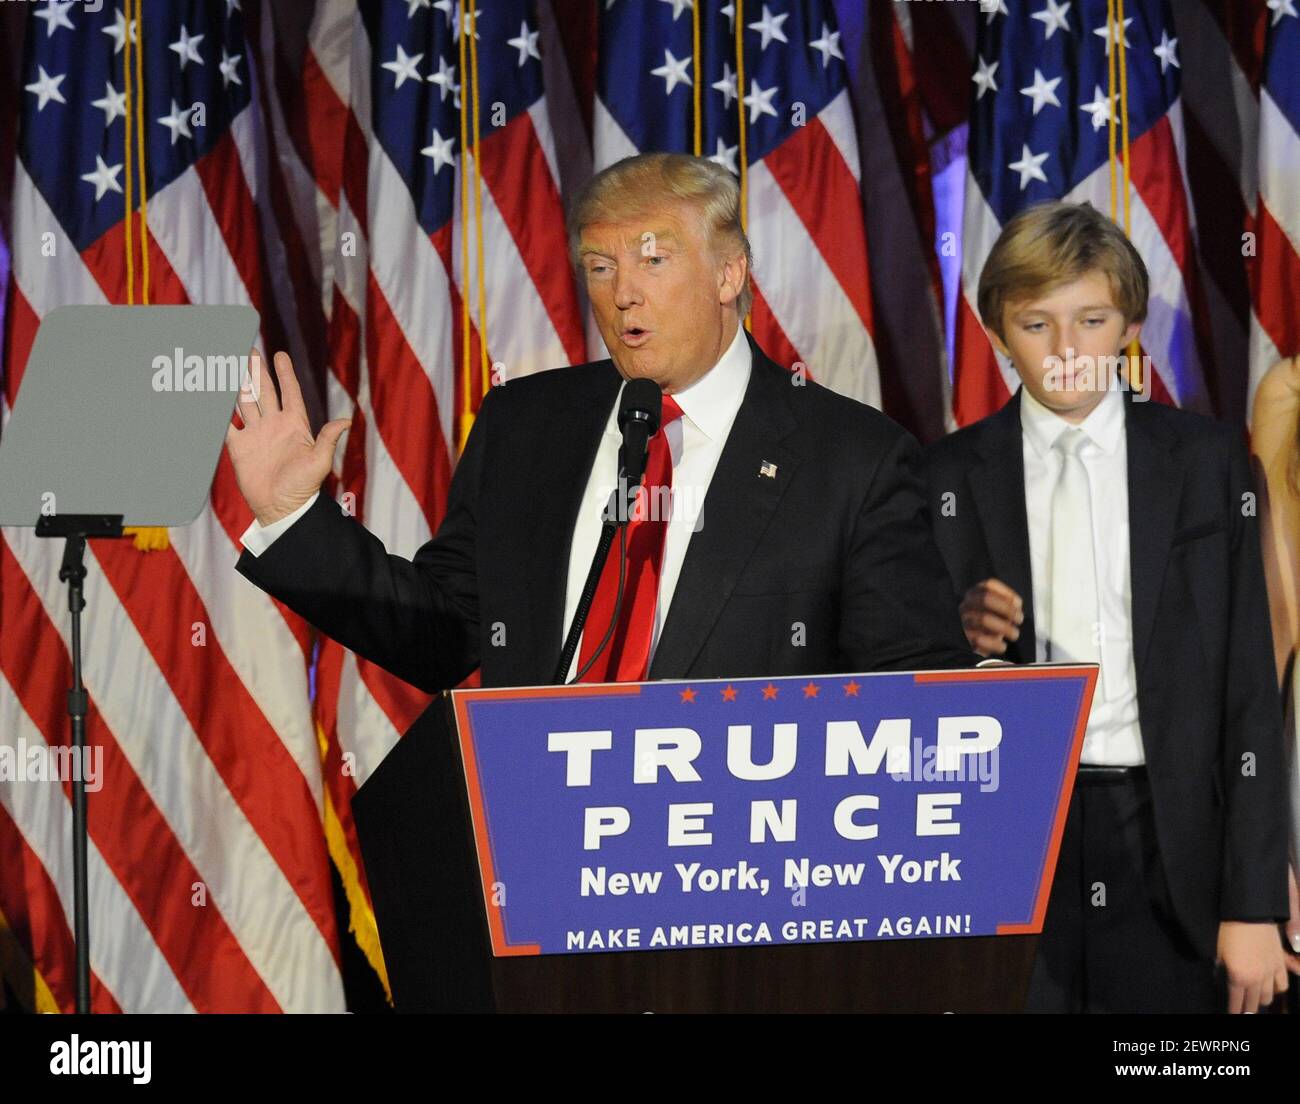 Donald Trump speaks to supporters on election night in the ballroom of the Hilton Hotel after being declared the winner of the presidential election on Nov. 9, 2016, in New York. (Photo by Louis Lanzano/Sipa USA) Stock Photo